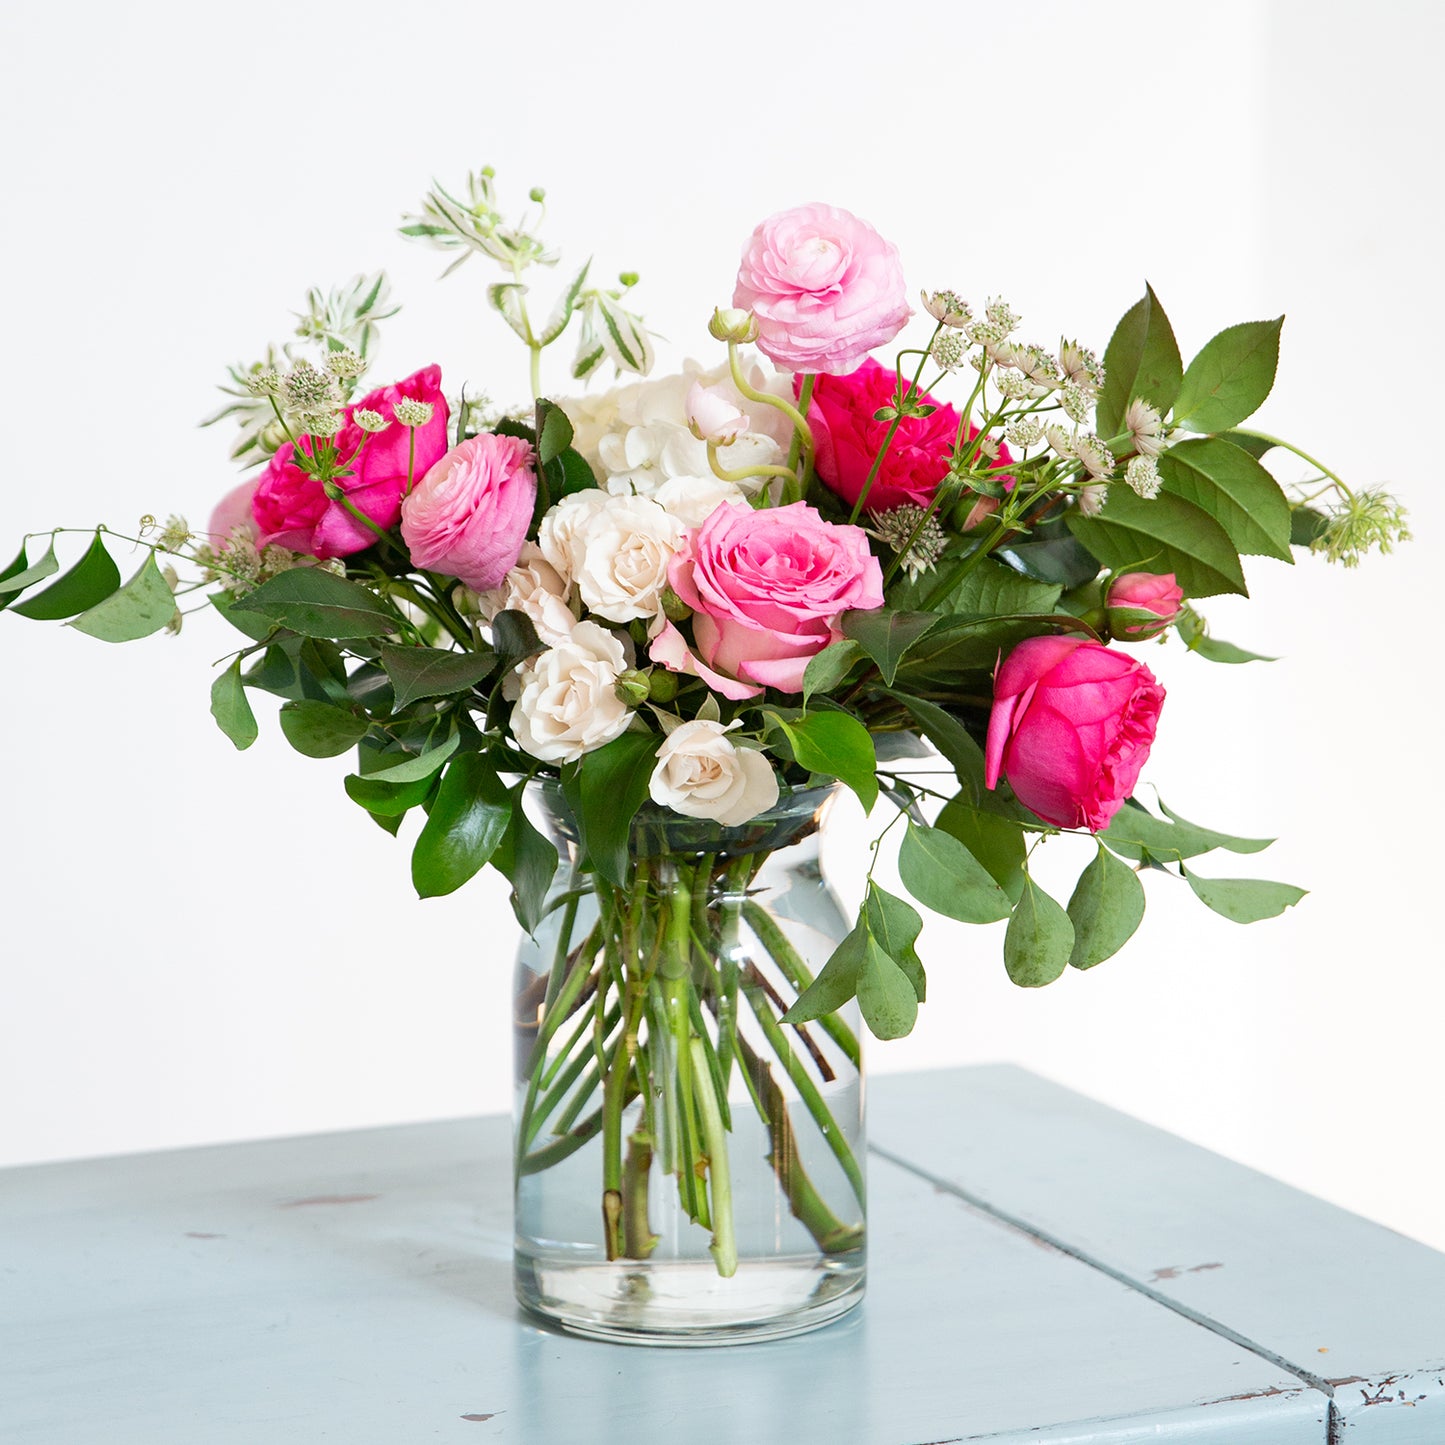 Pink, red, and white roses arranged beautifully in a milk jug vase.